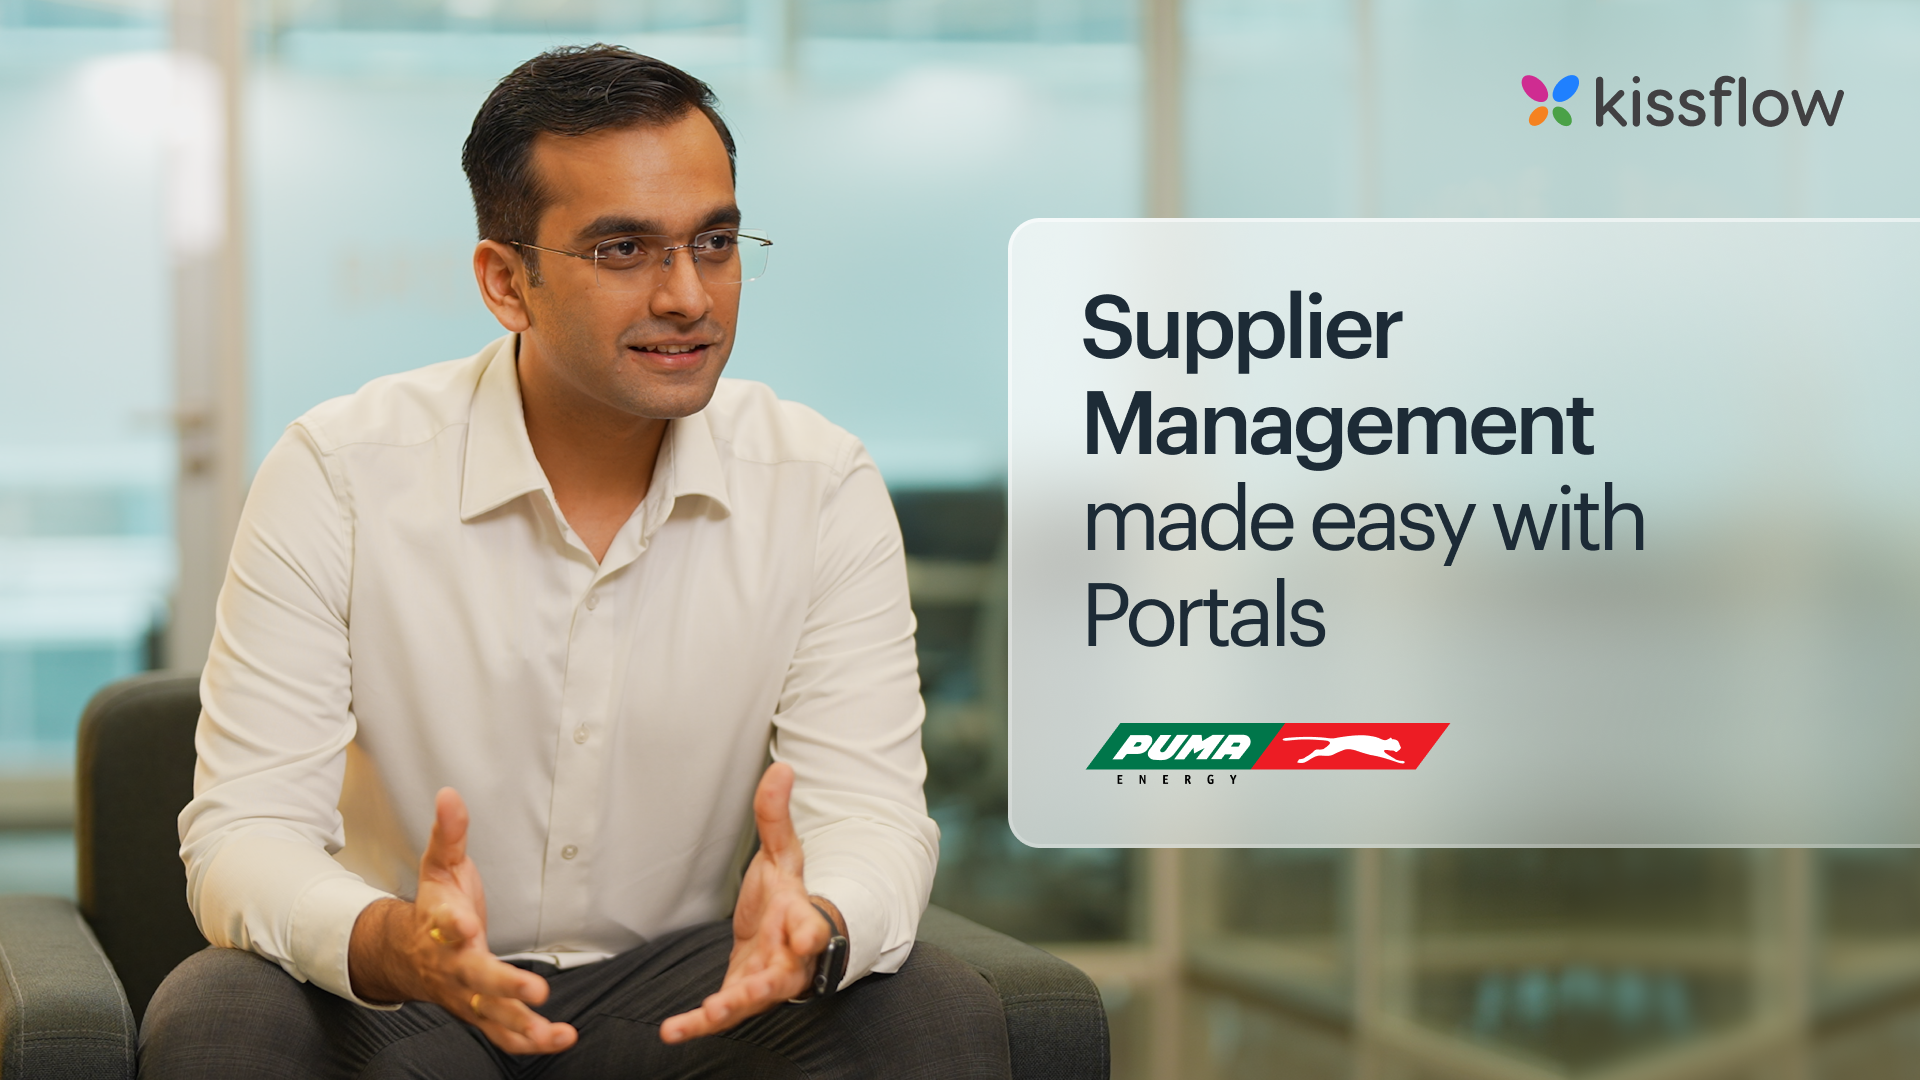 Supplier Management made easy with Portals